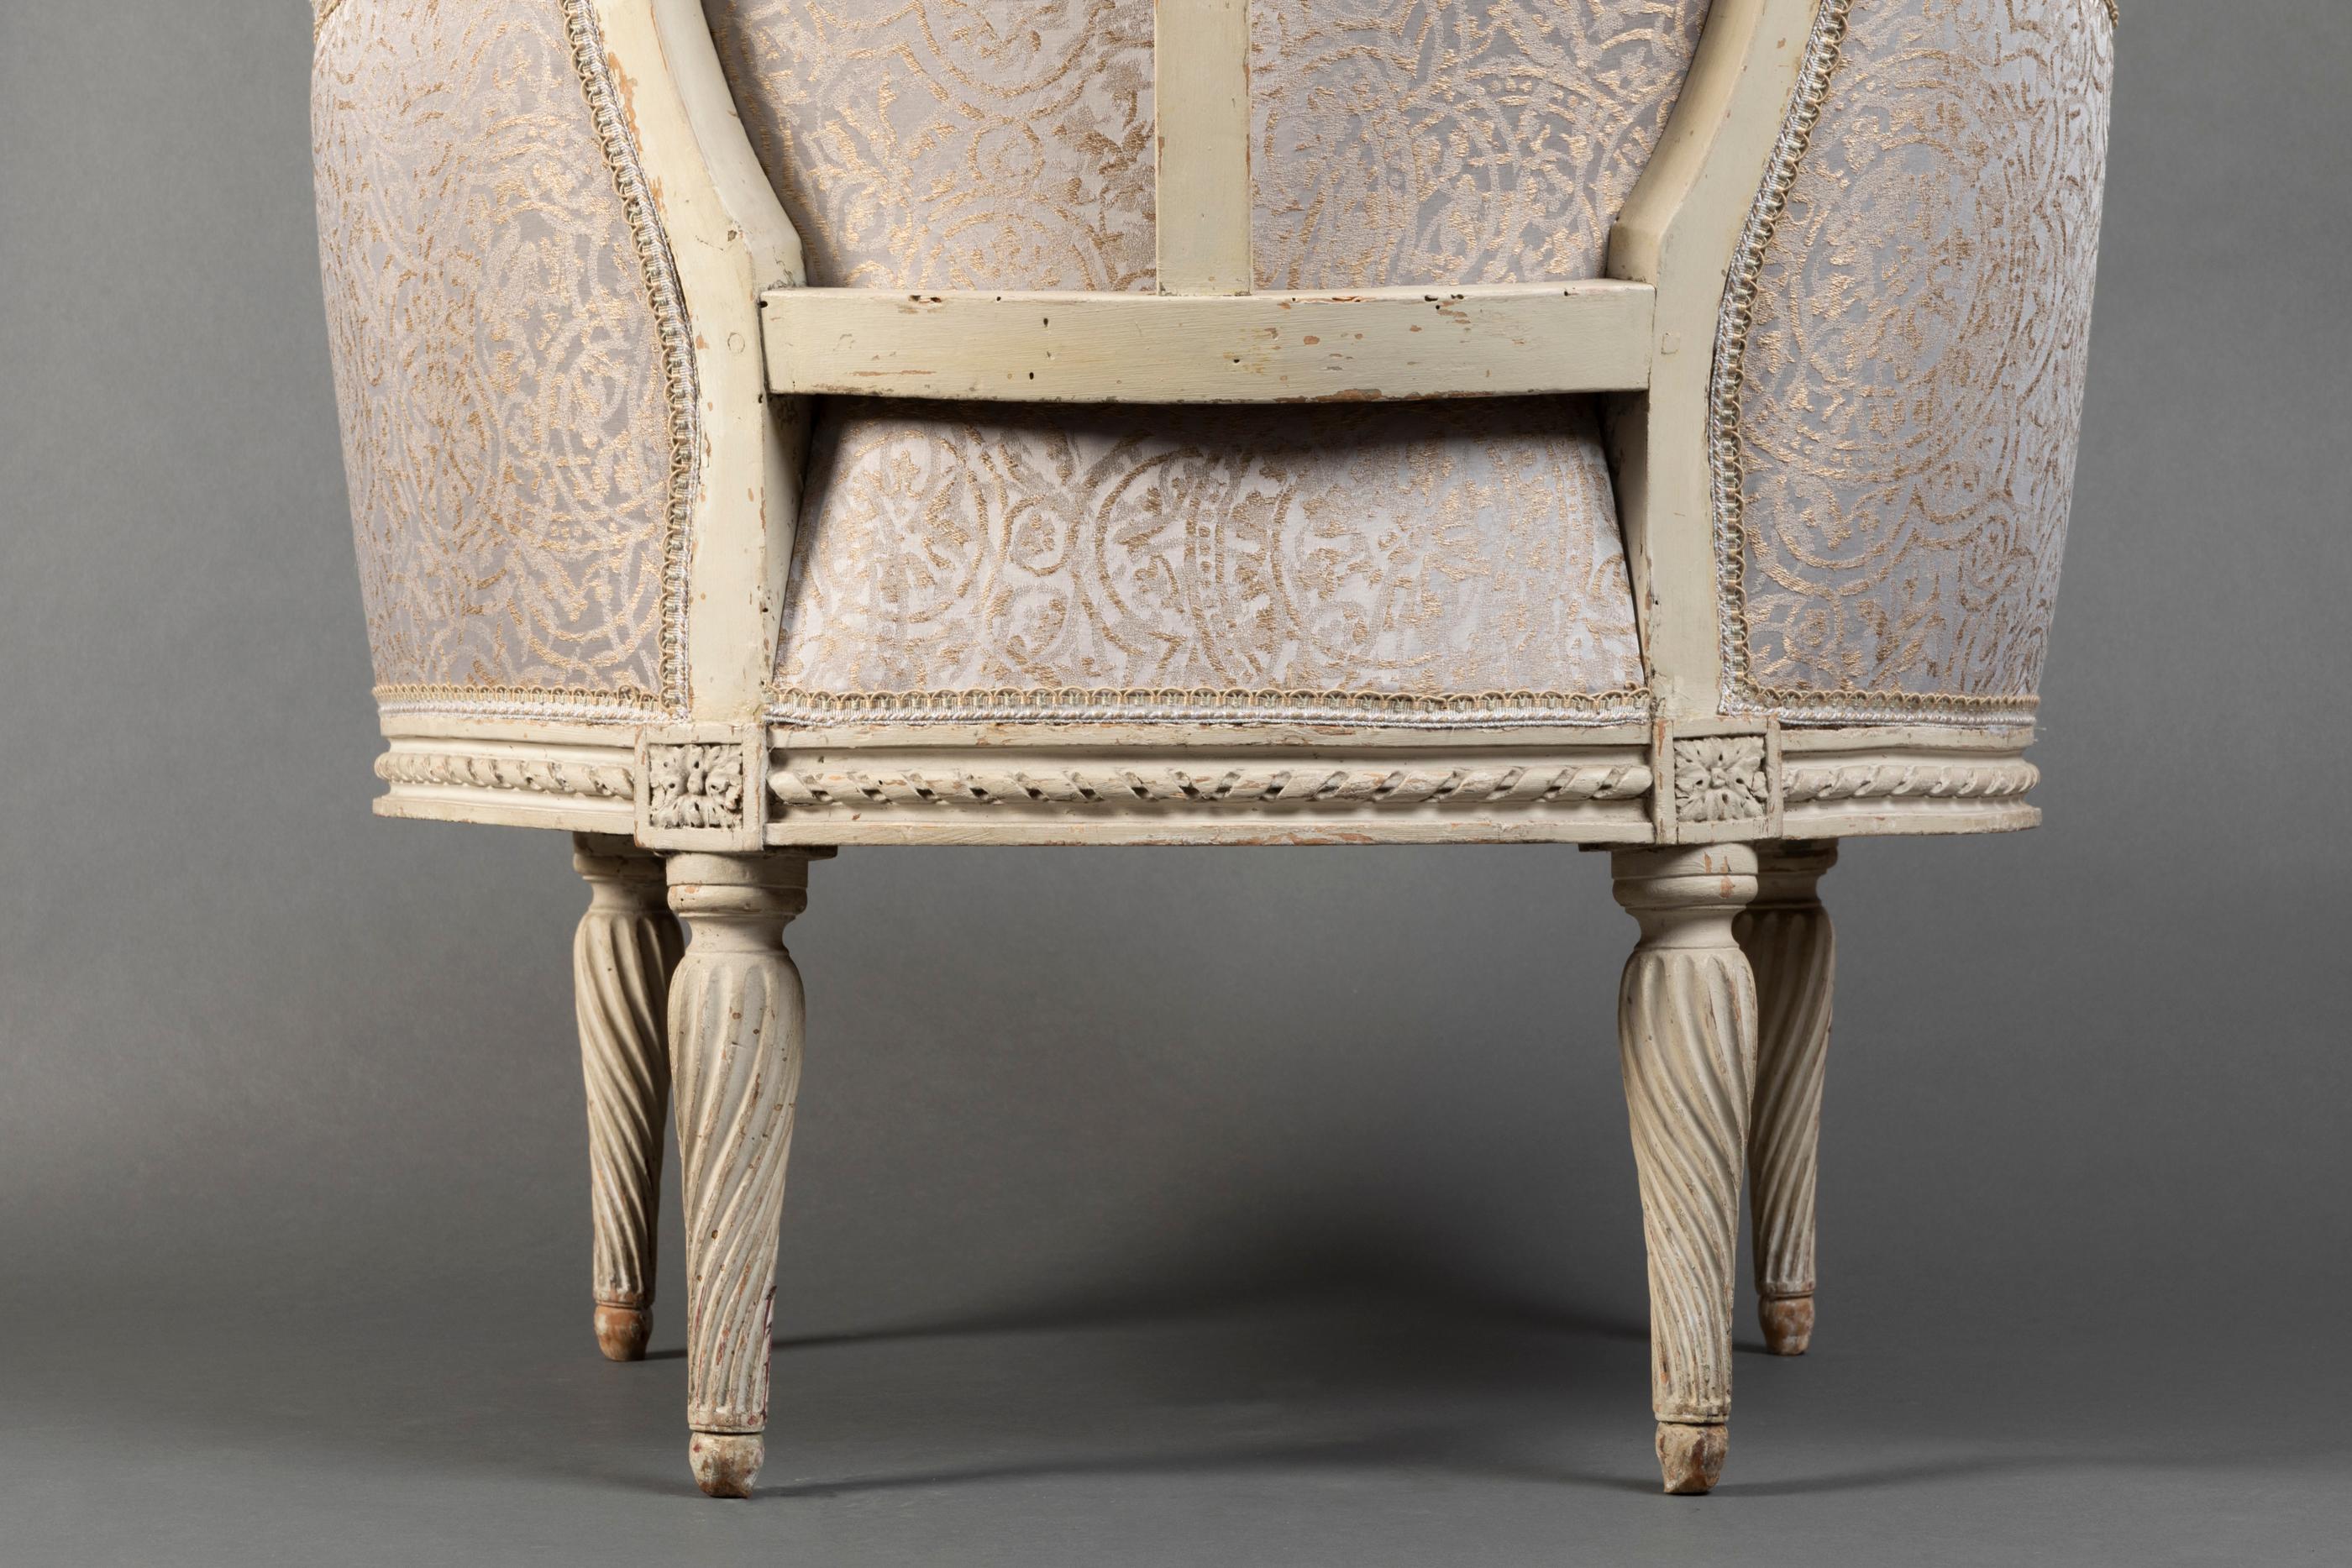 Pair of Bergère Chairs from the Louis XVI Period Stamped, Delanois, 18th Century For Sale 1